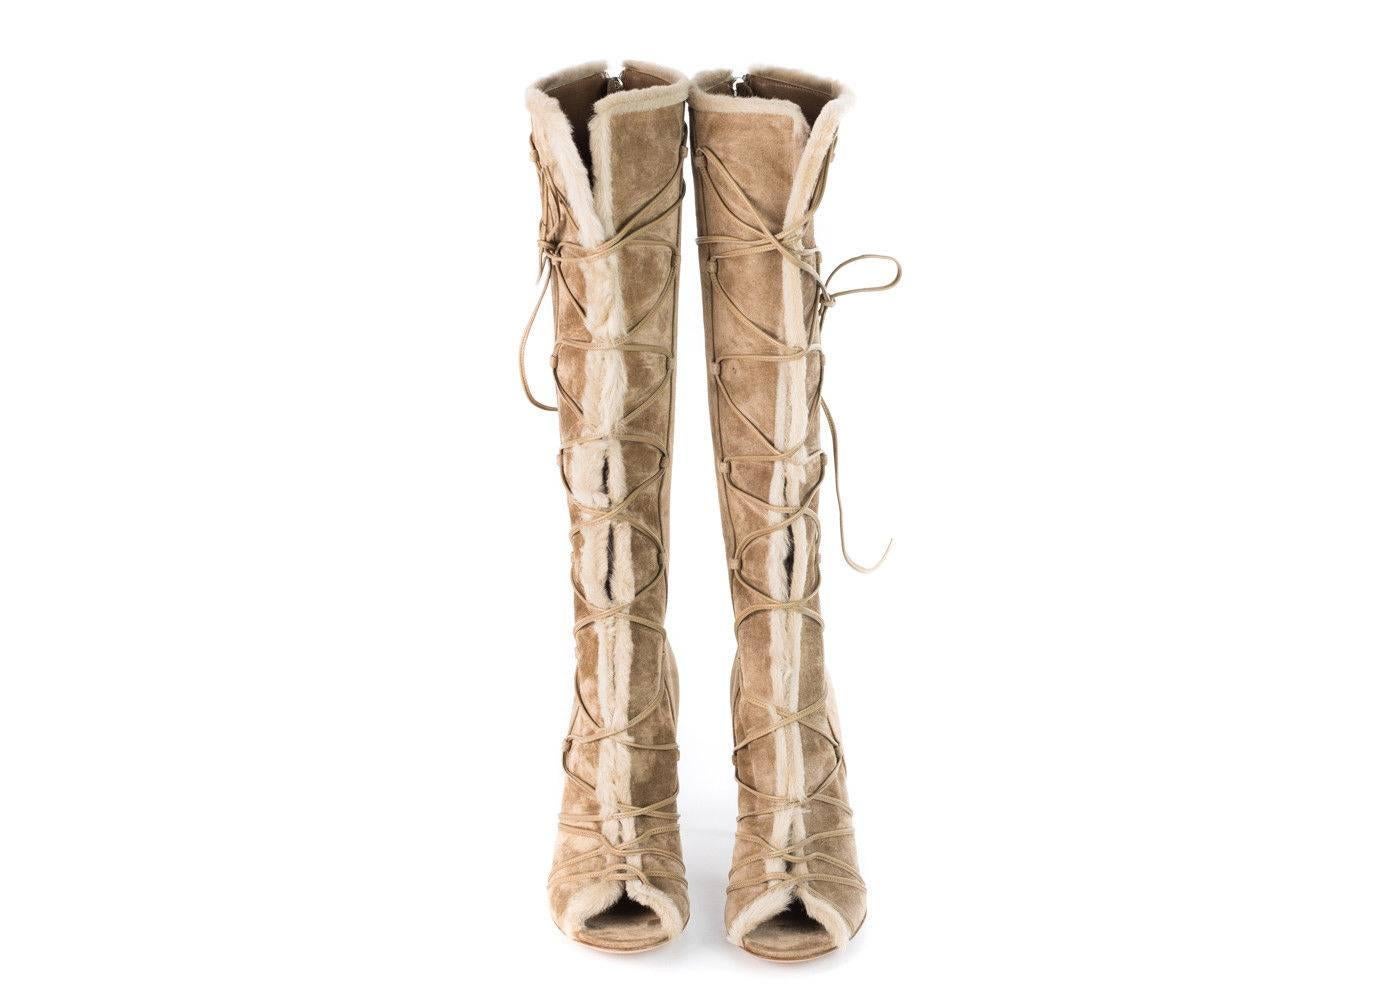 Gianvito Rossi Suede Shearling Trimmed 
 Knee High Lace Up Boots
Retails In-Store & Online for $1,649
New Without Box
Size IT 40 / US 10

Meet the sleekest shearling trimmed boot! Featuring a lux suede finish. Combined this silhouette with pants or